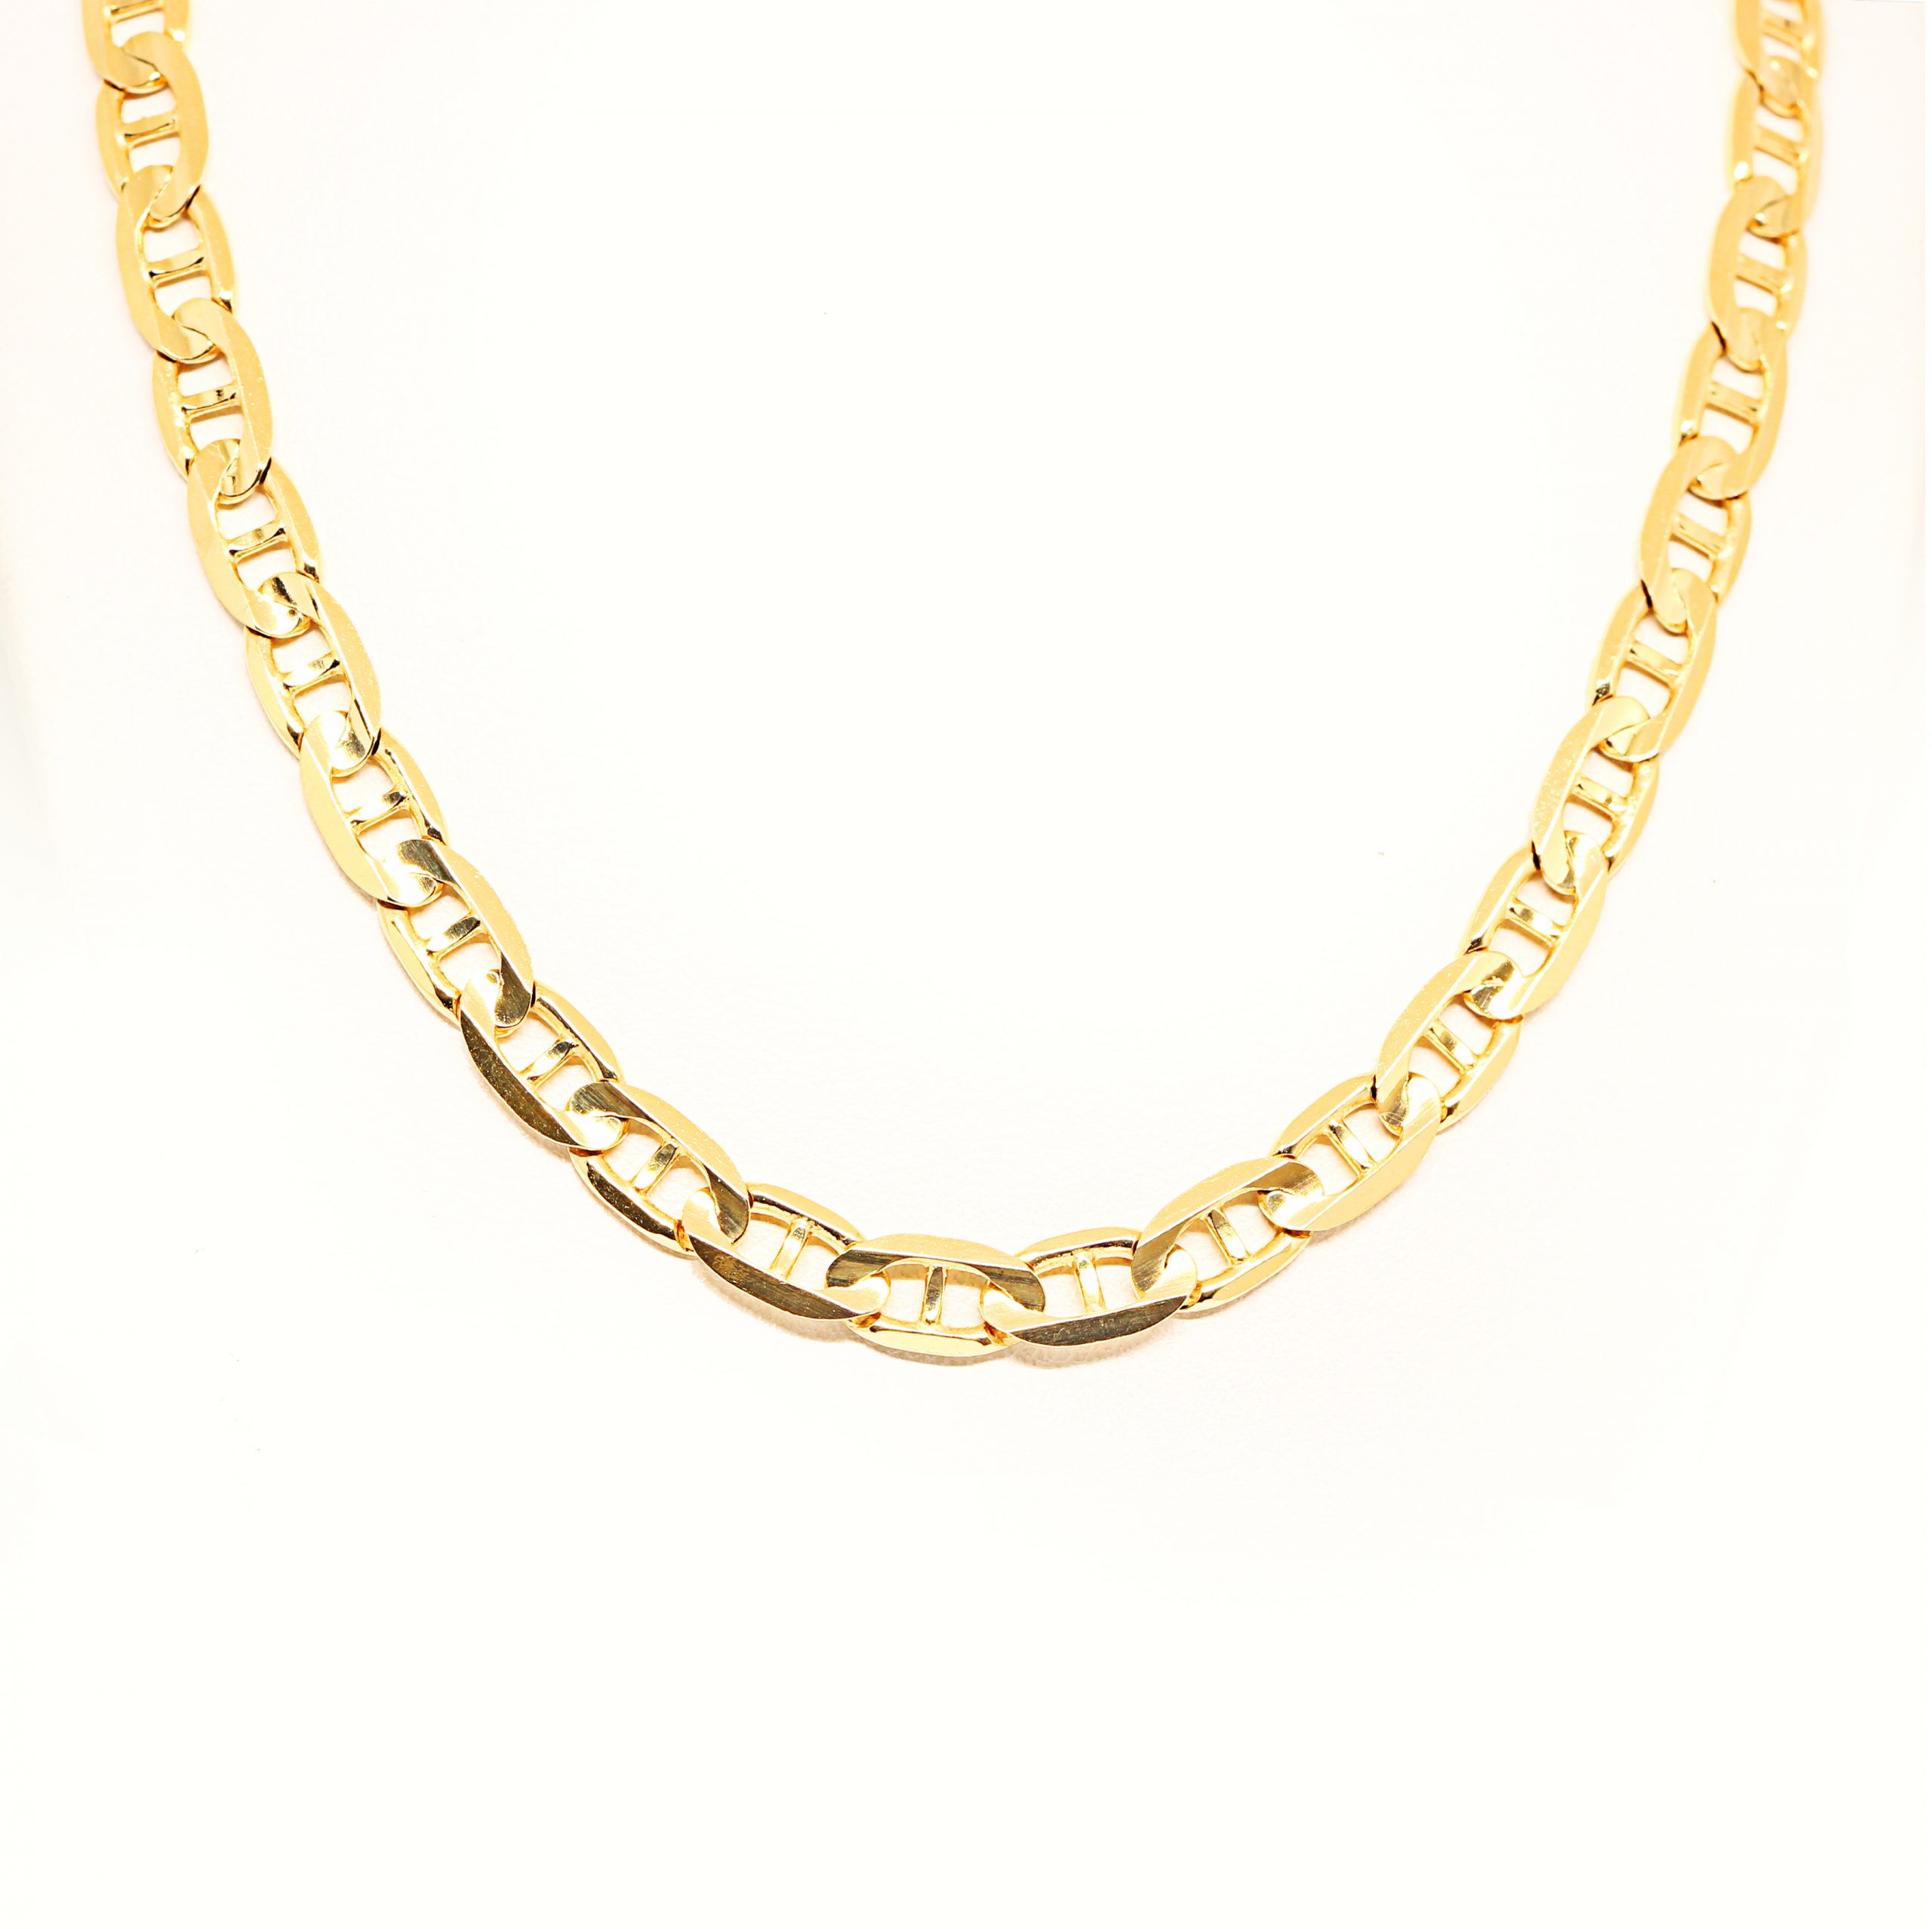 Anchor Chain in 14k Yellow Gold | Audry Rose